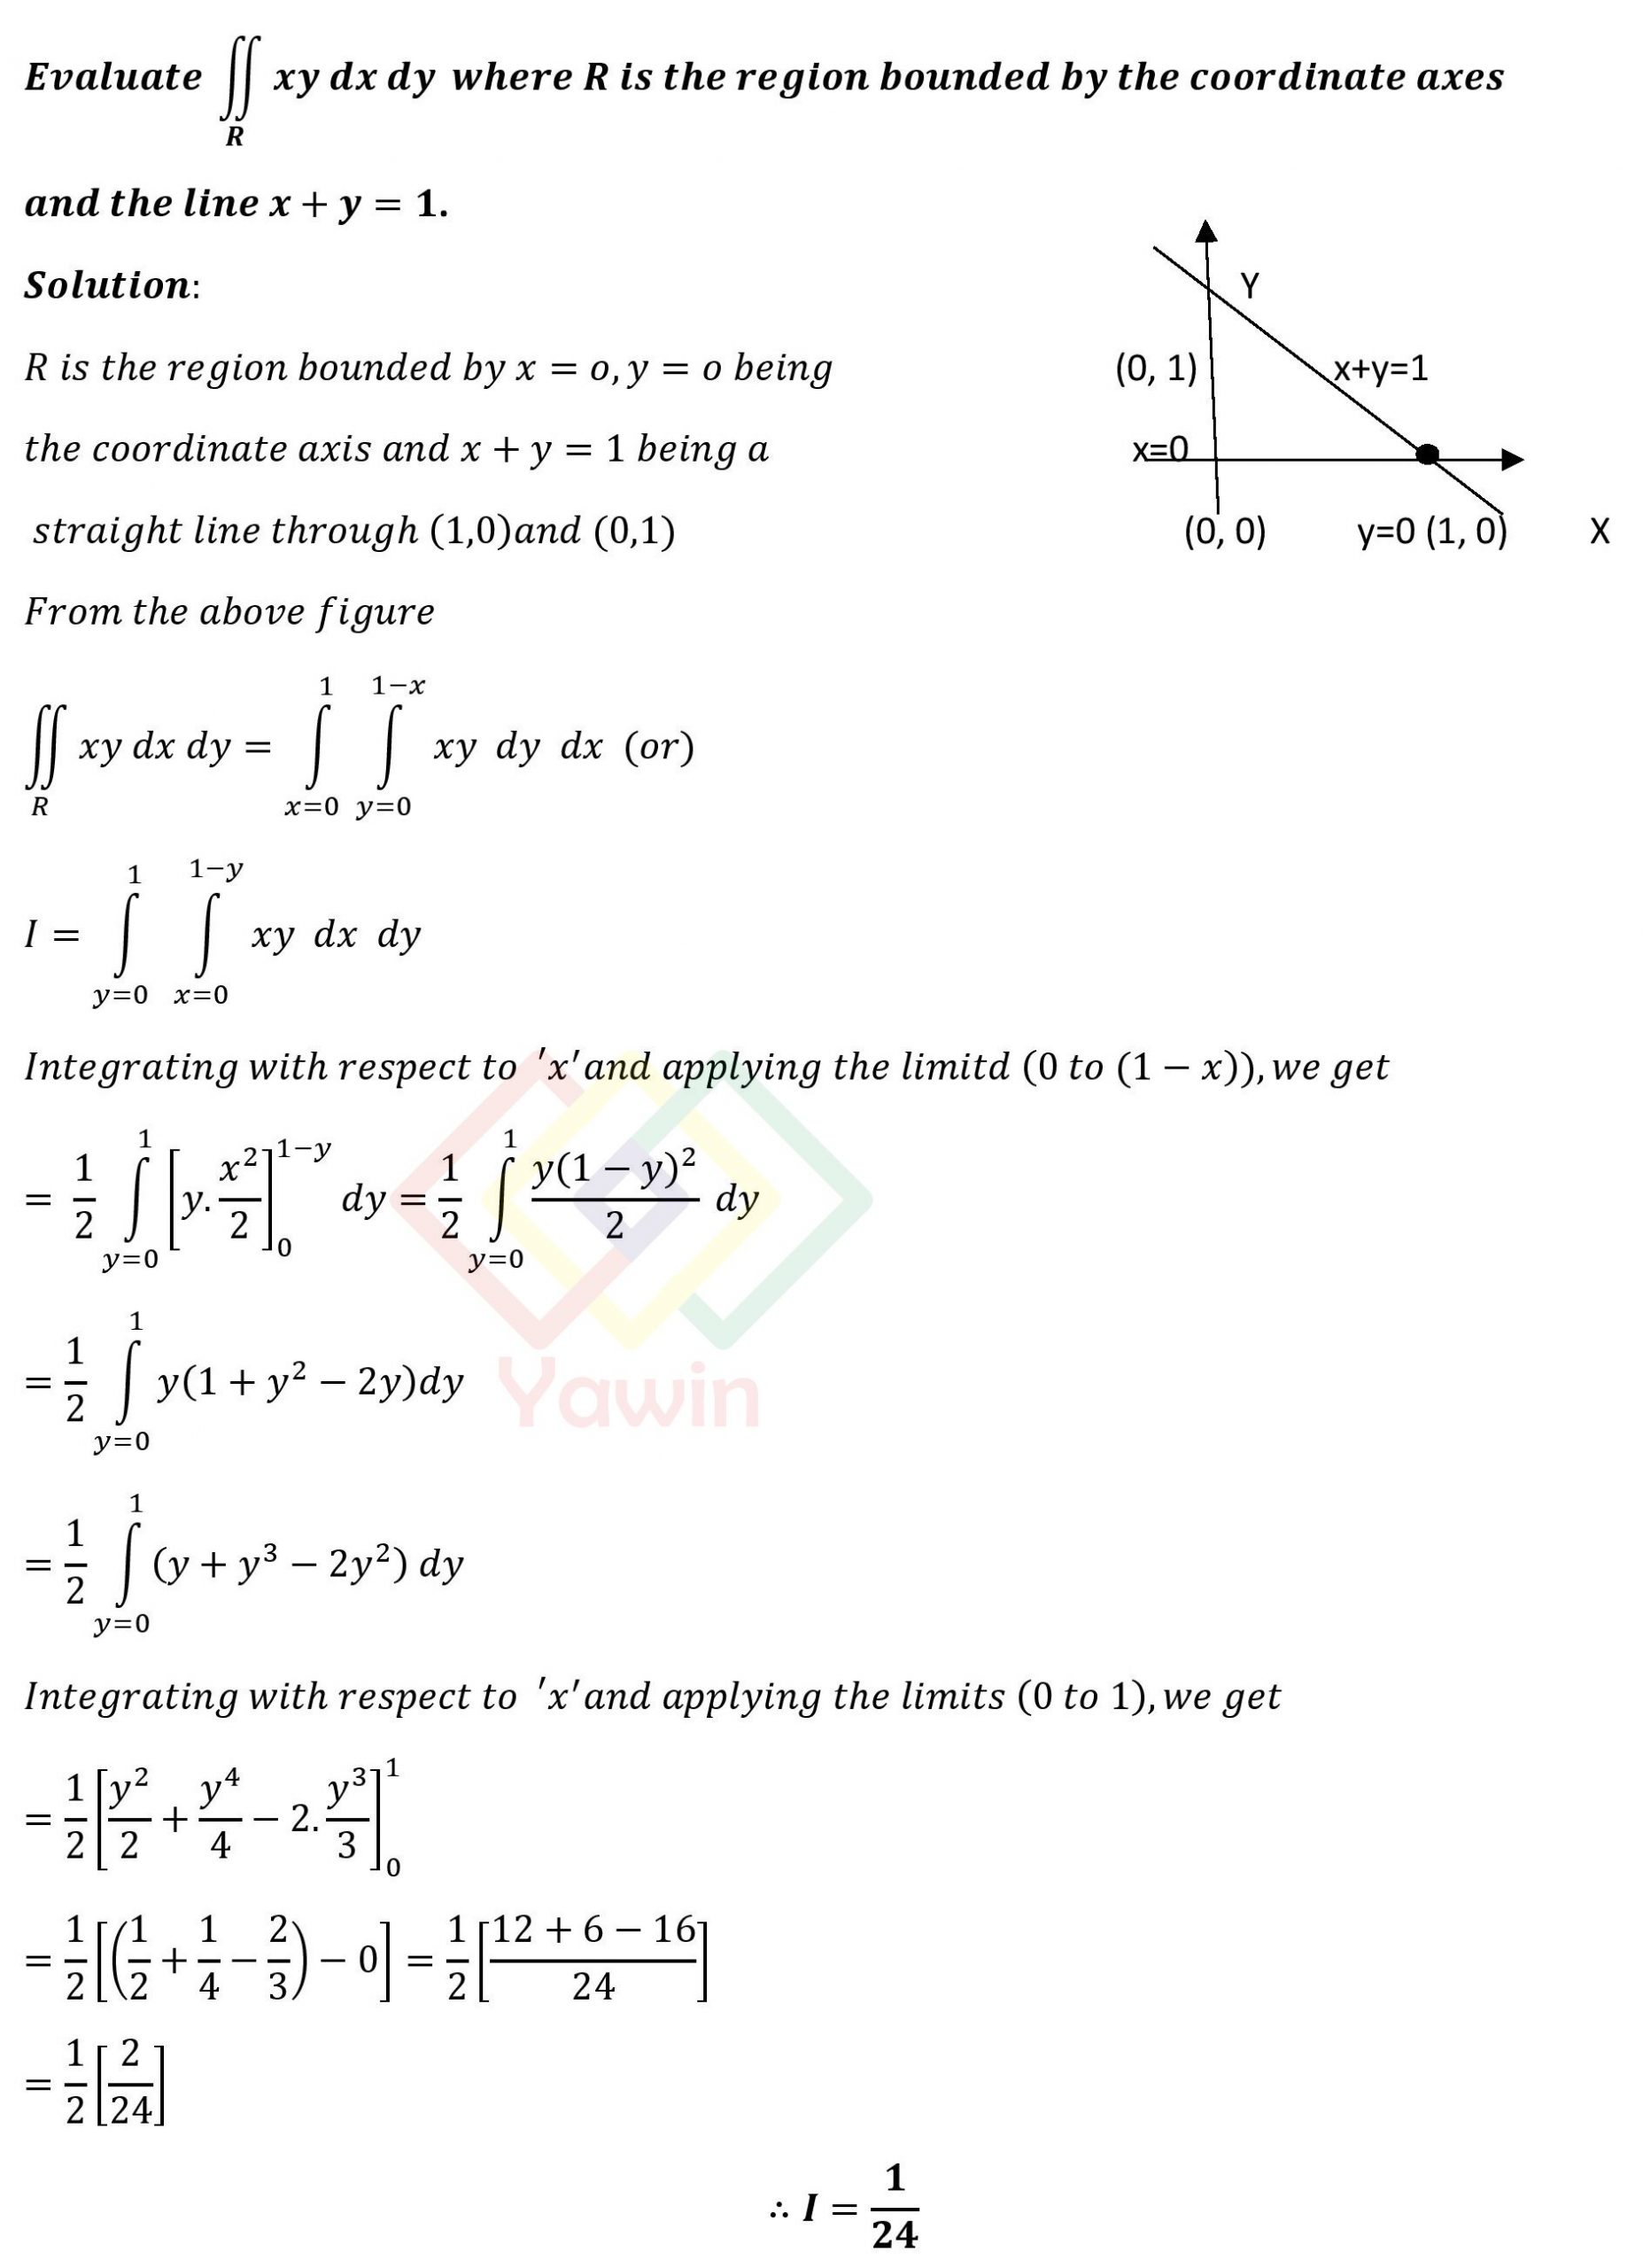 Evaluate Double Integral Of Xy Dx Dy Over The Specified Region R Where R Is The Region Bounded